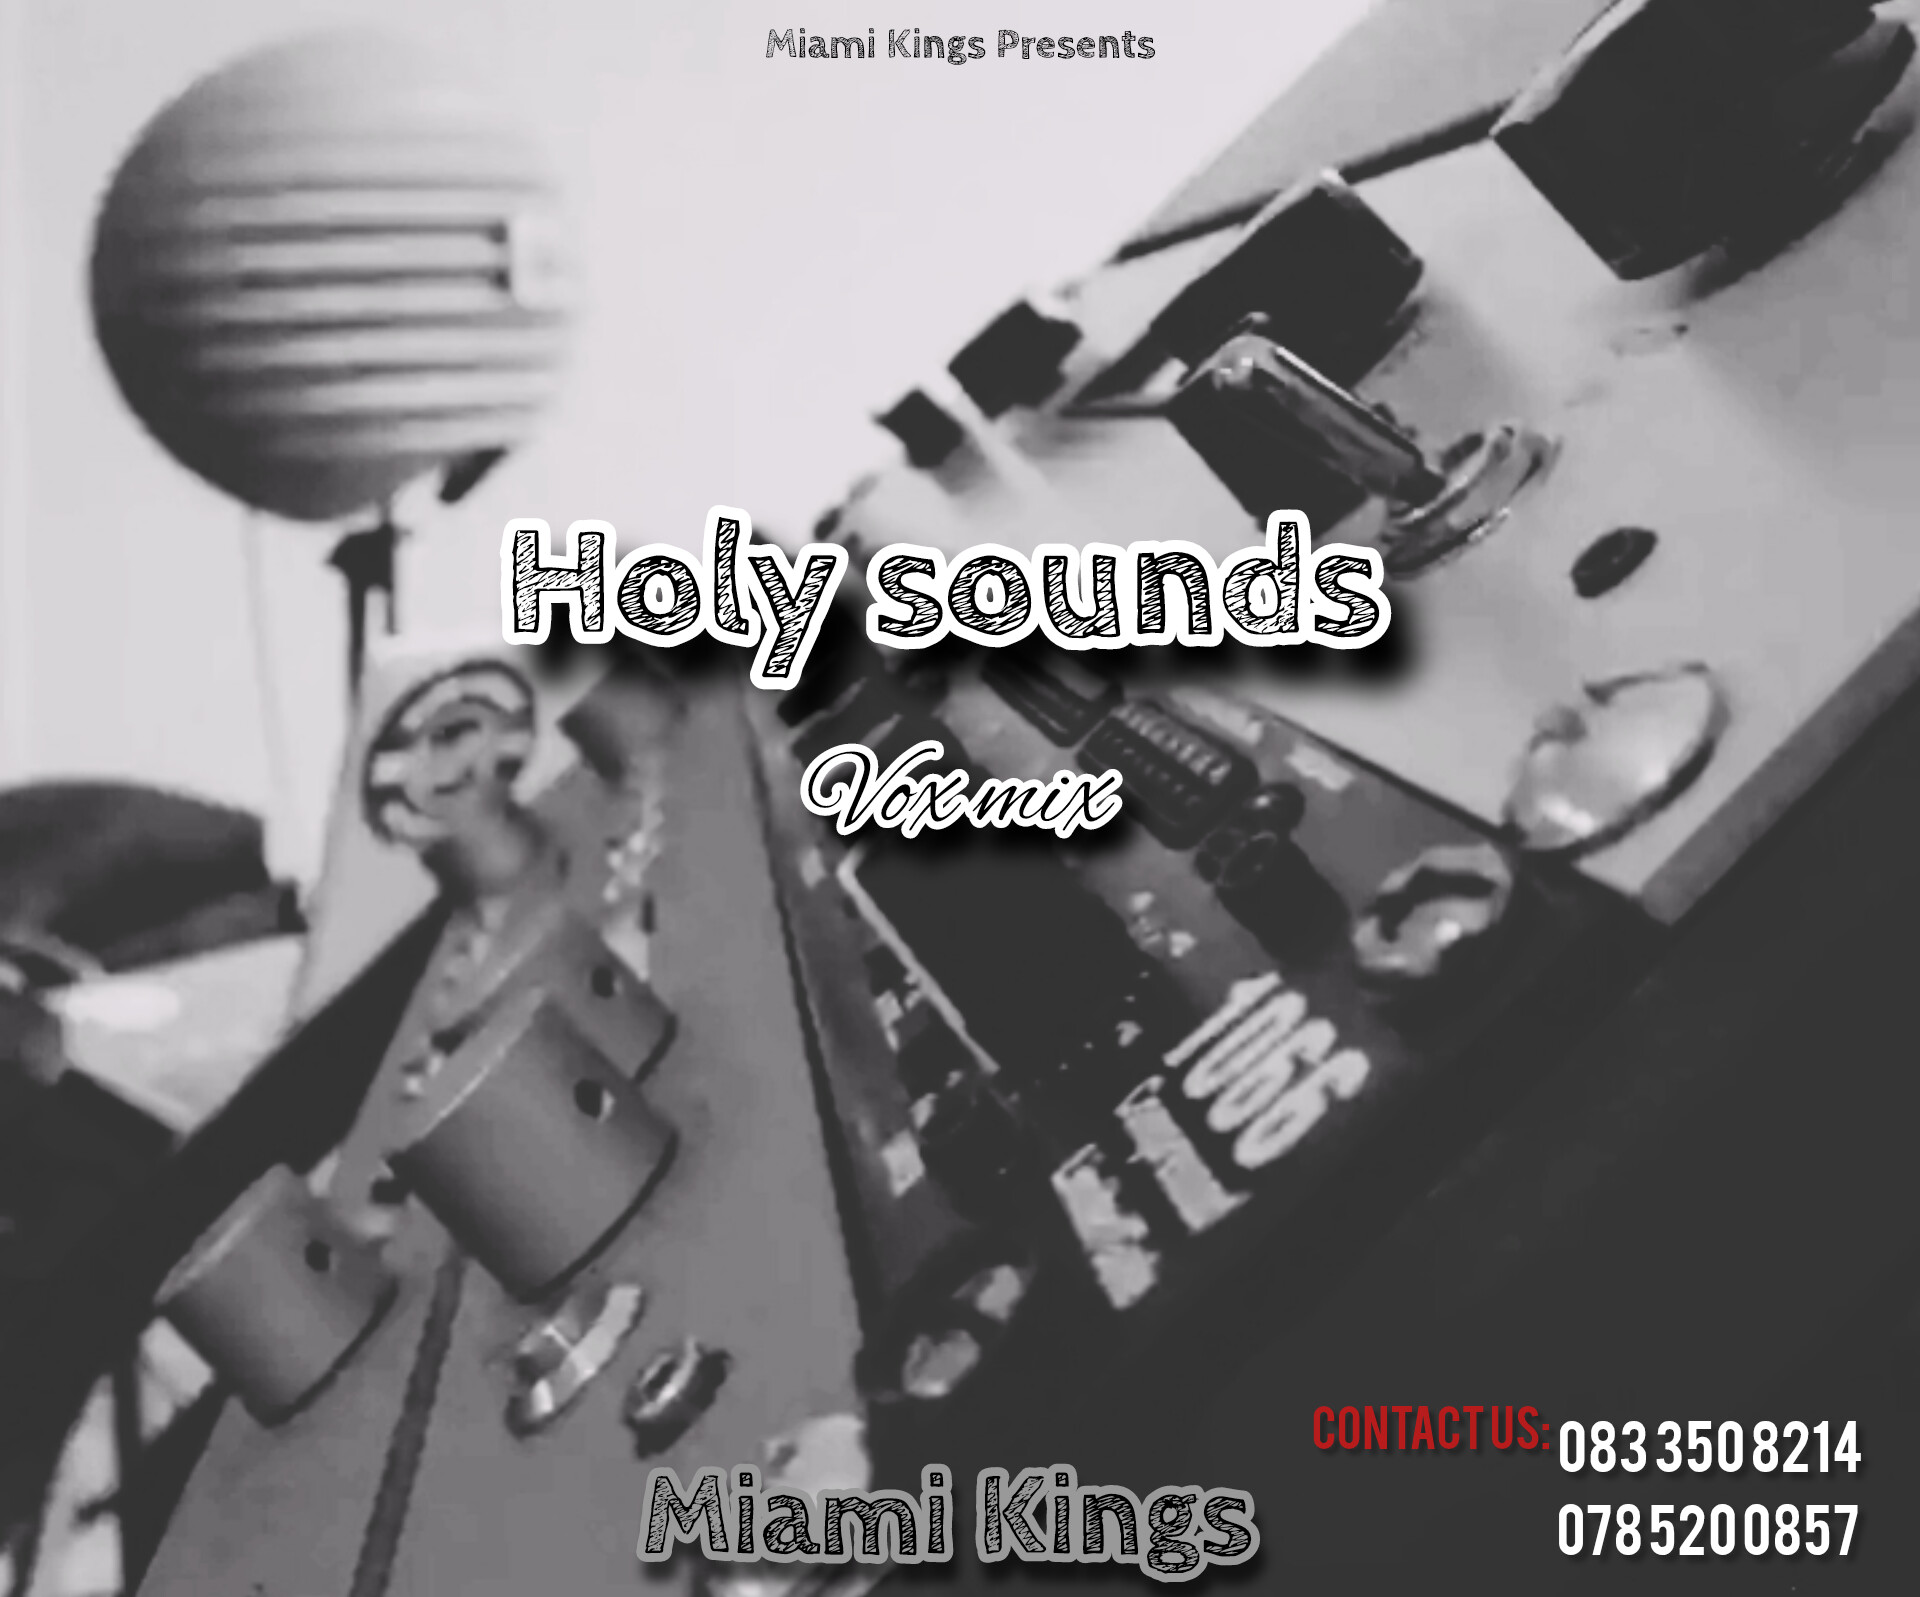 Holy sounds - Miami kings